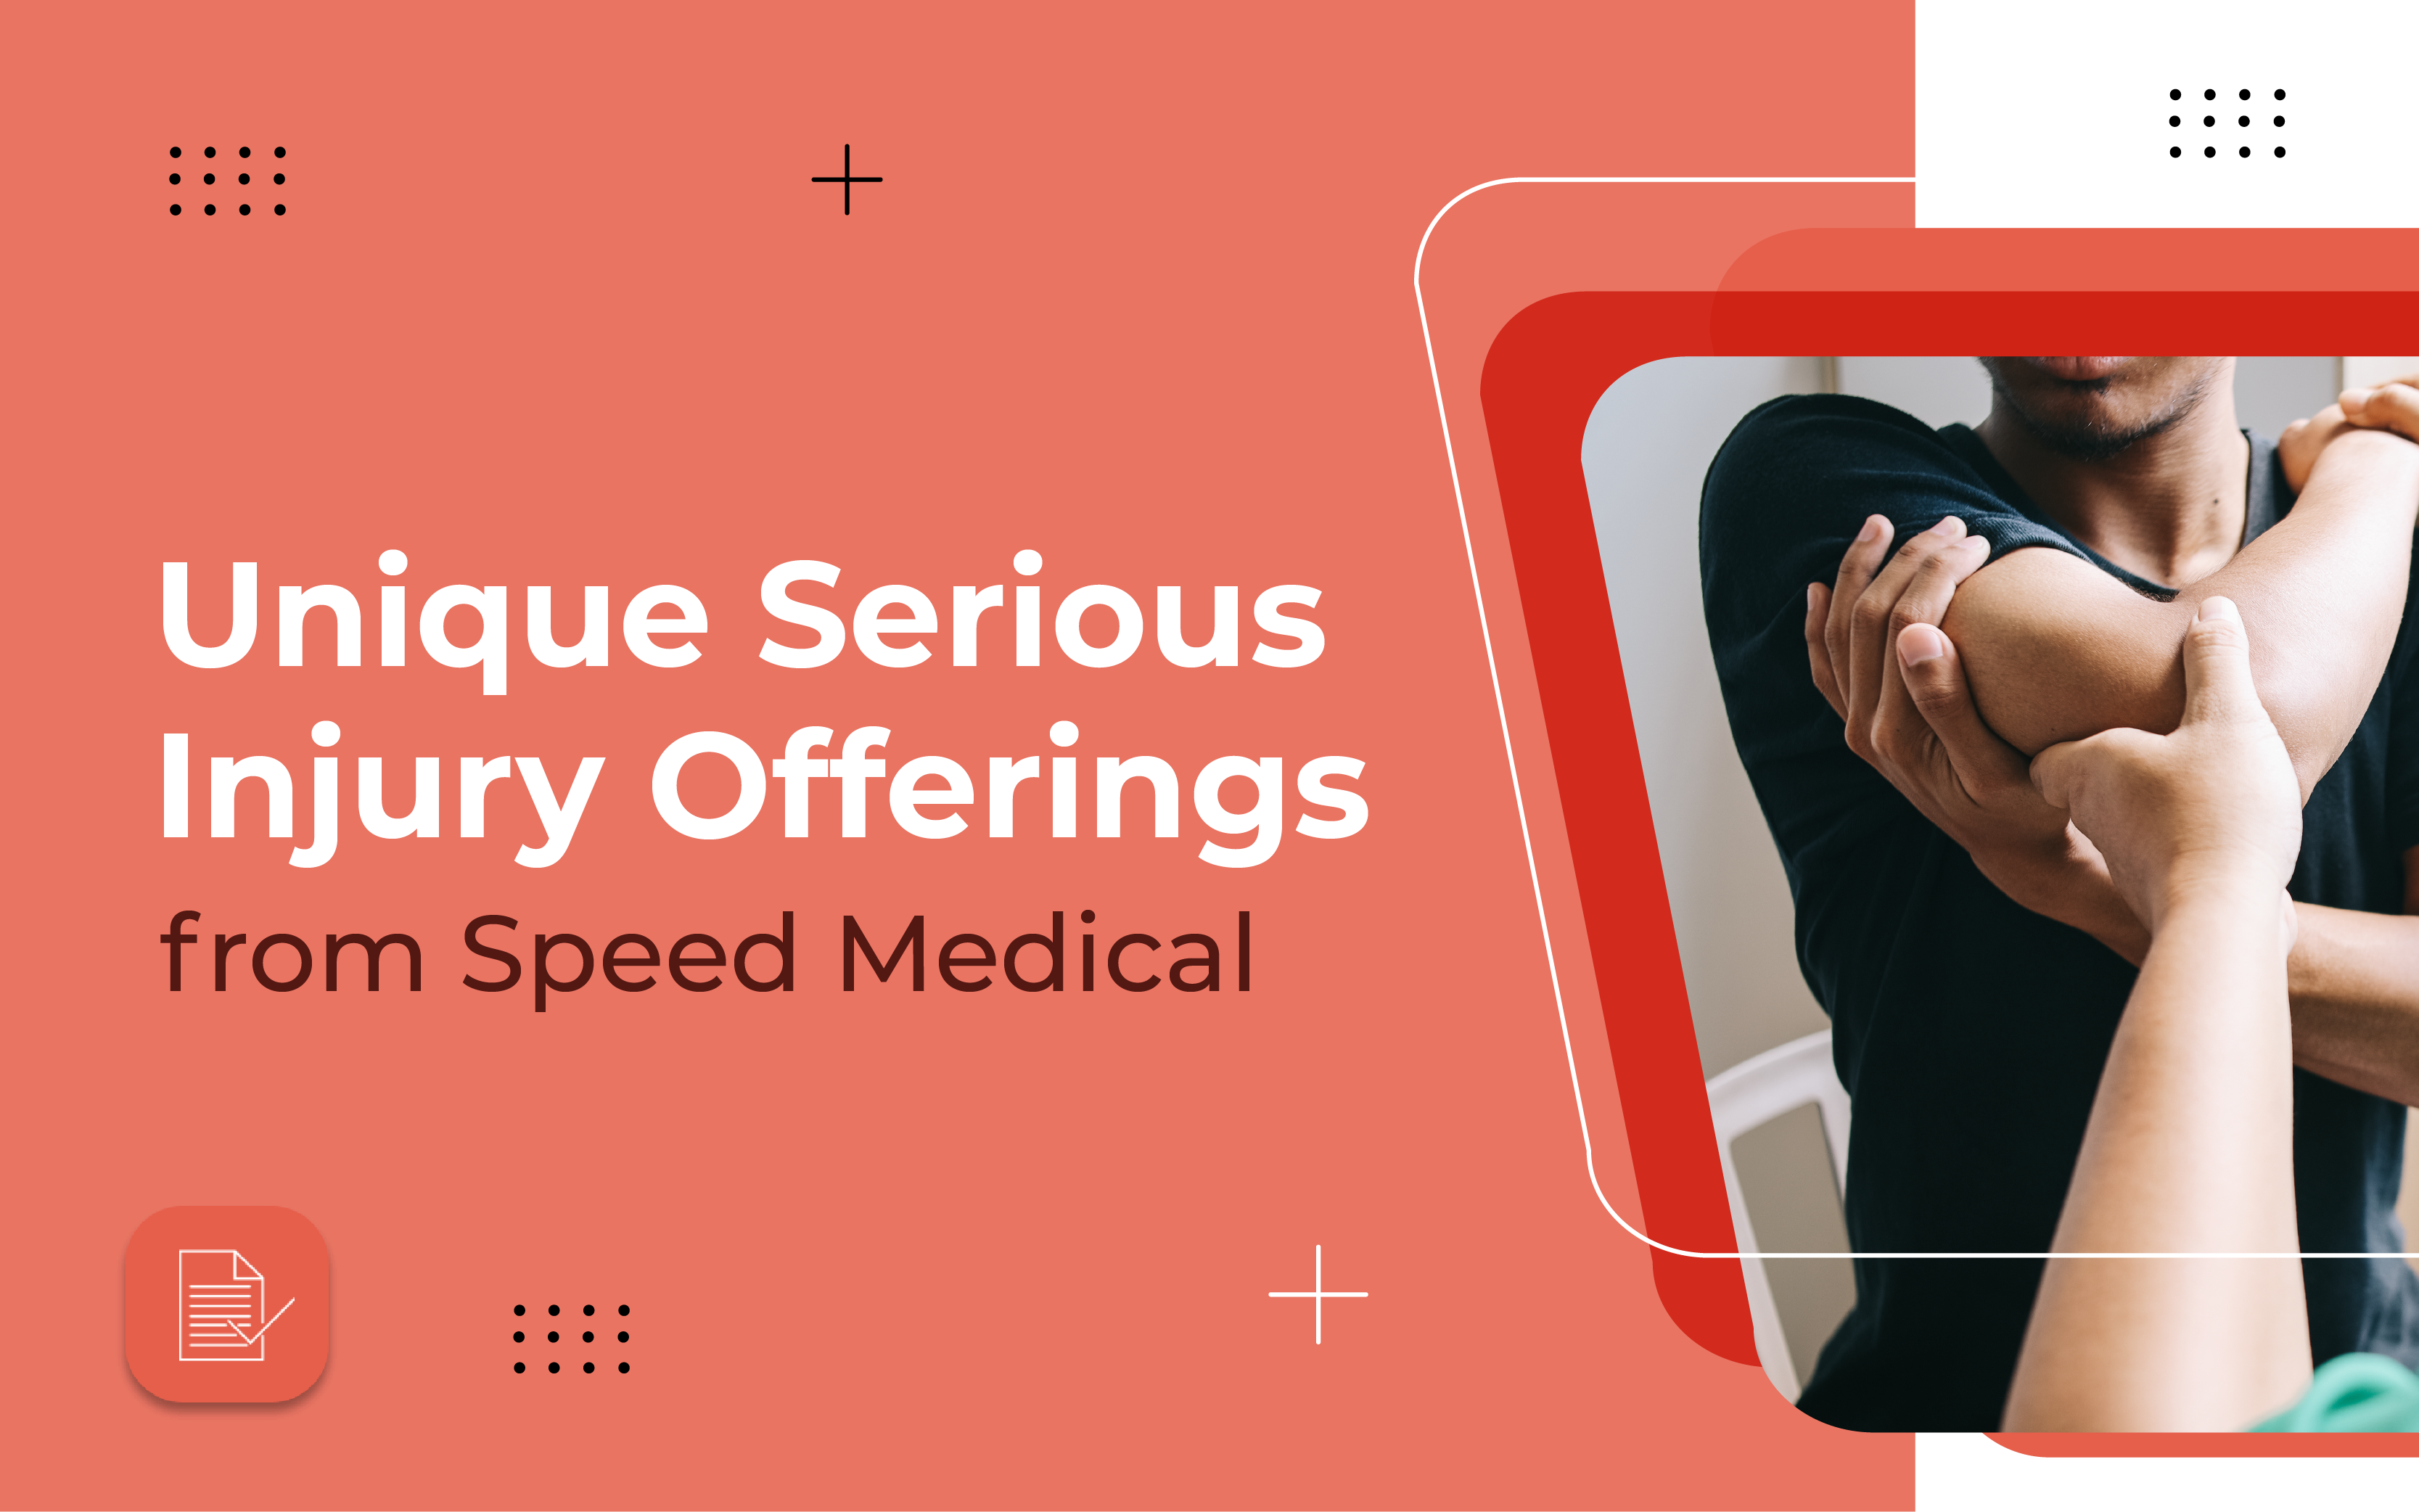 Unique Serious Injury offerings from Speed Medical